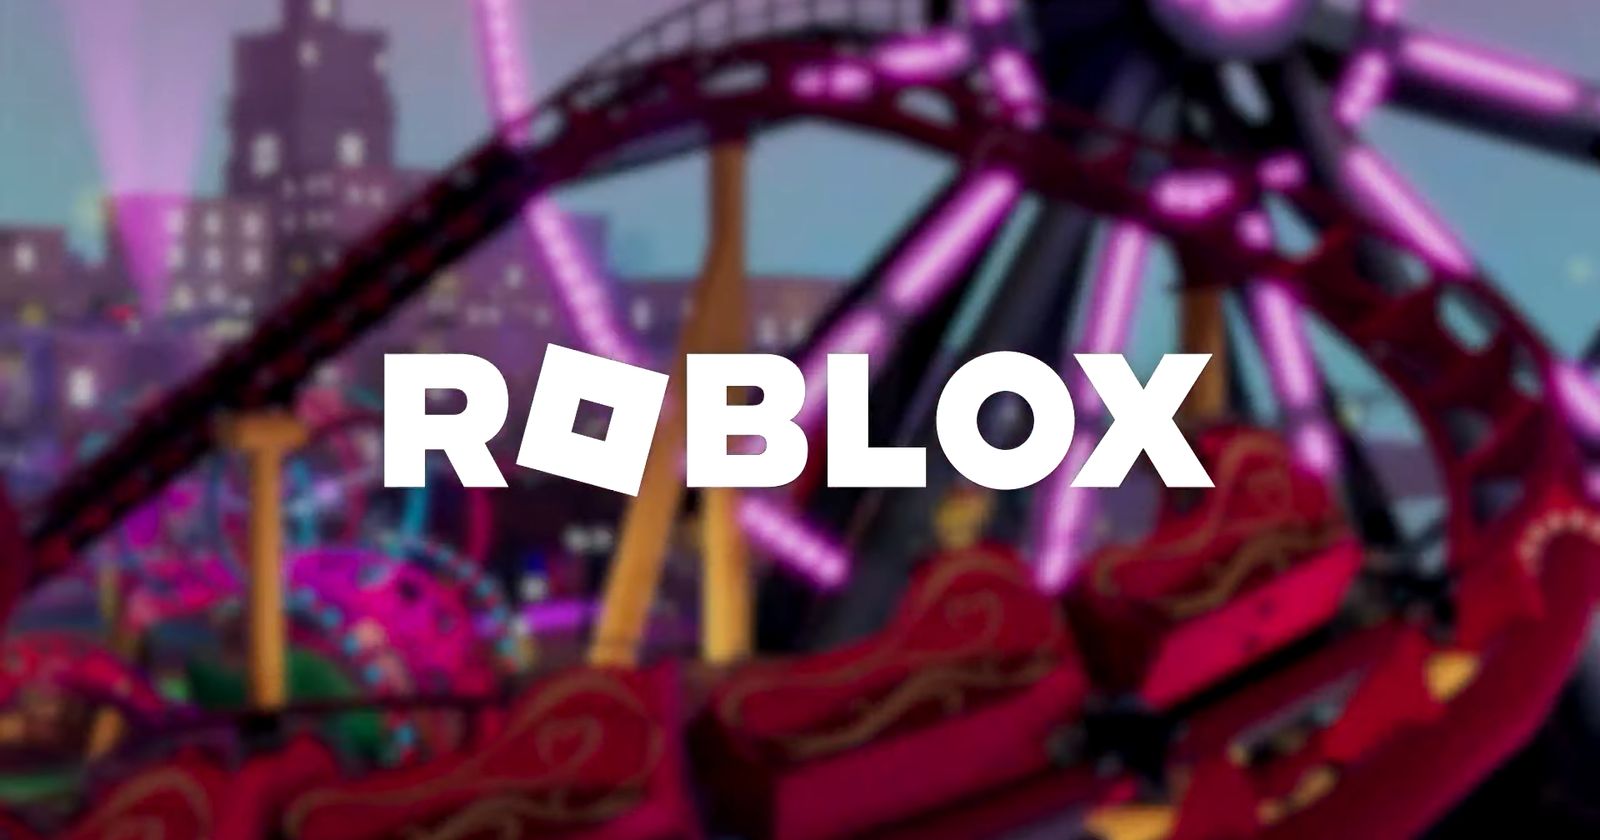 HOW TO DOWNLOAD ROBLOX ON PLAYSTATION 4/5 